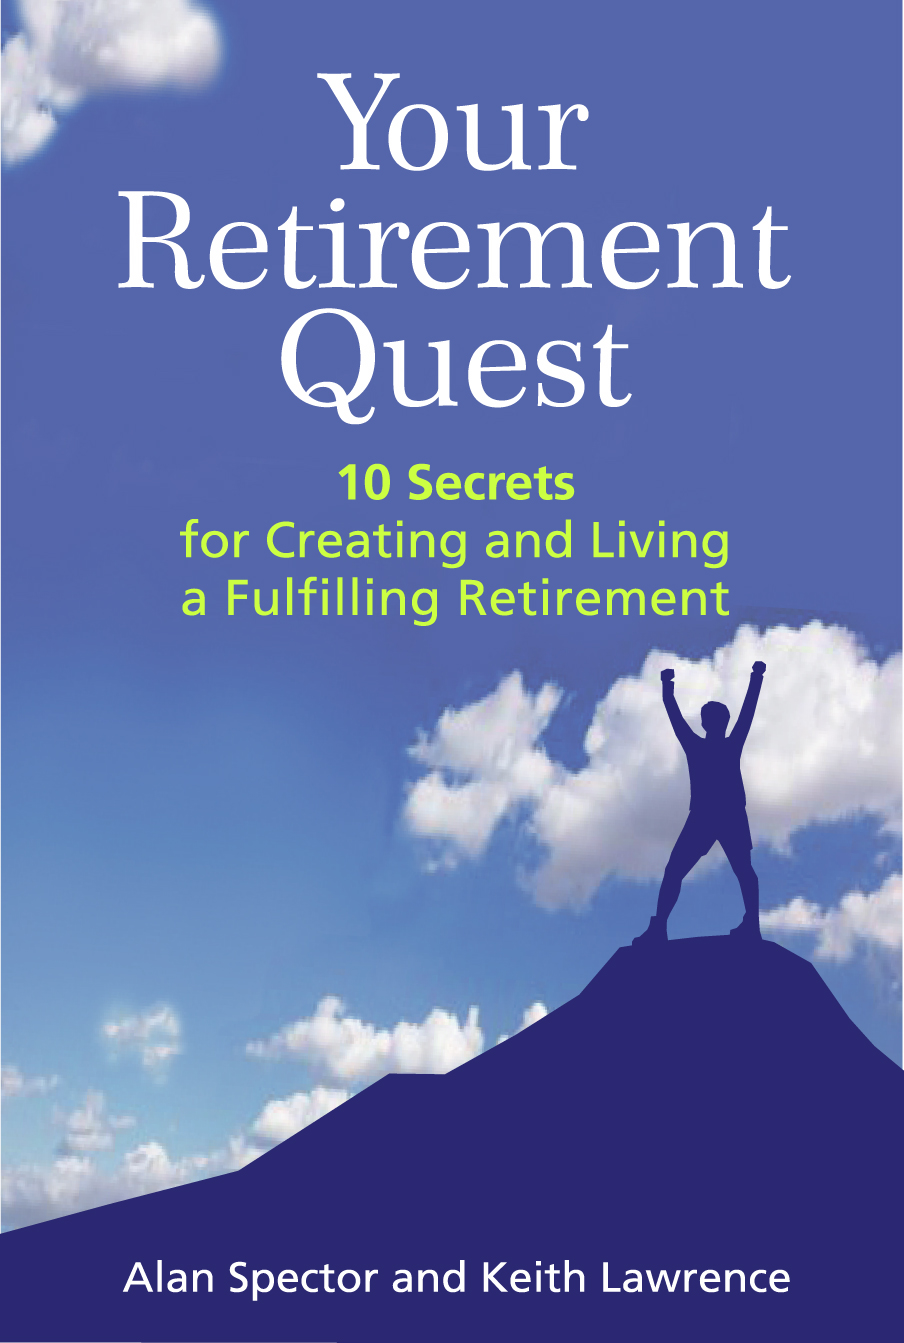 "Your Retirement Quest" Book Cover